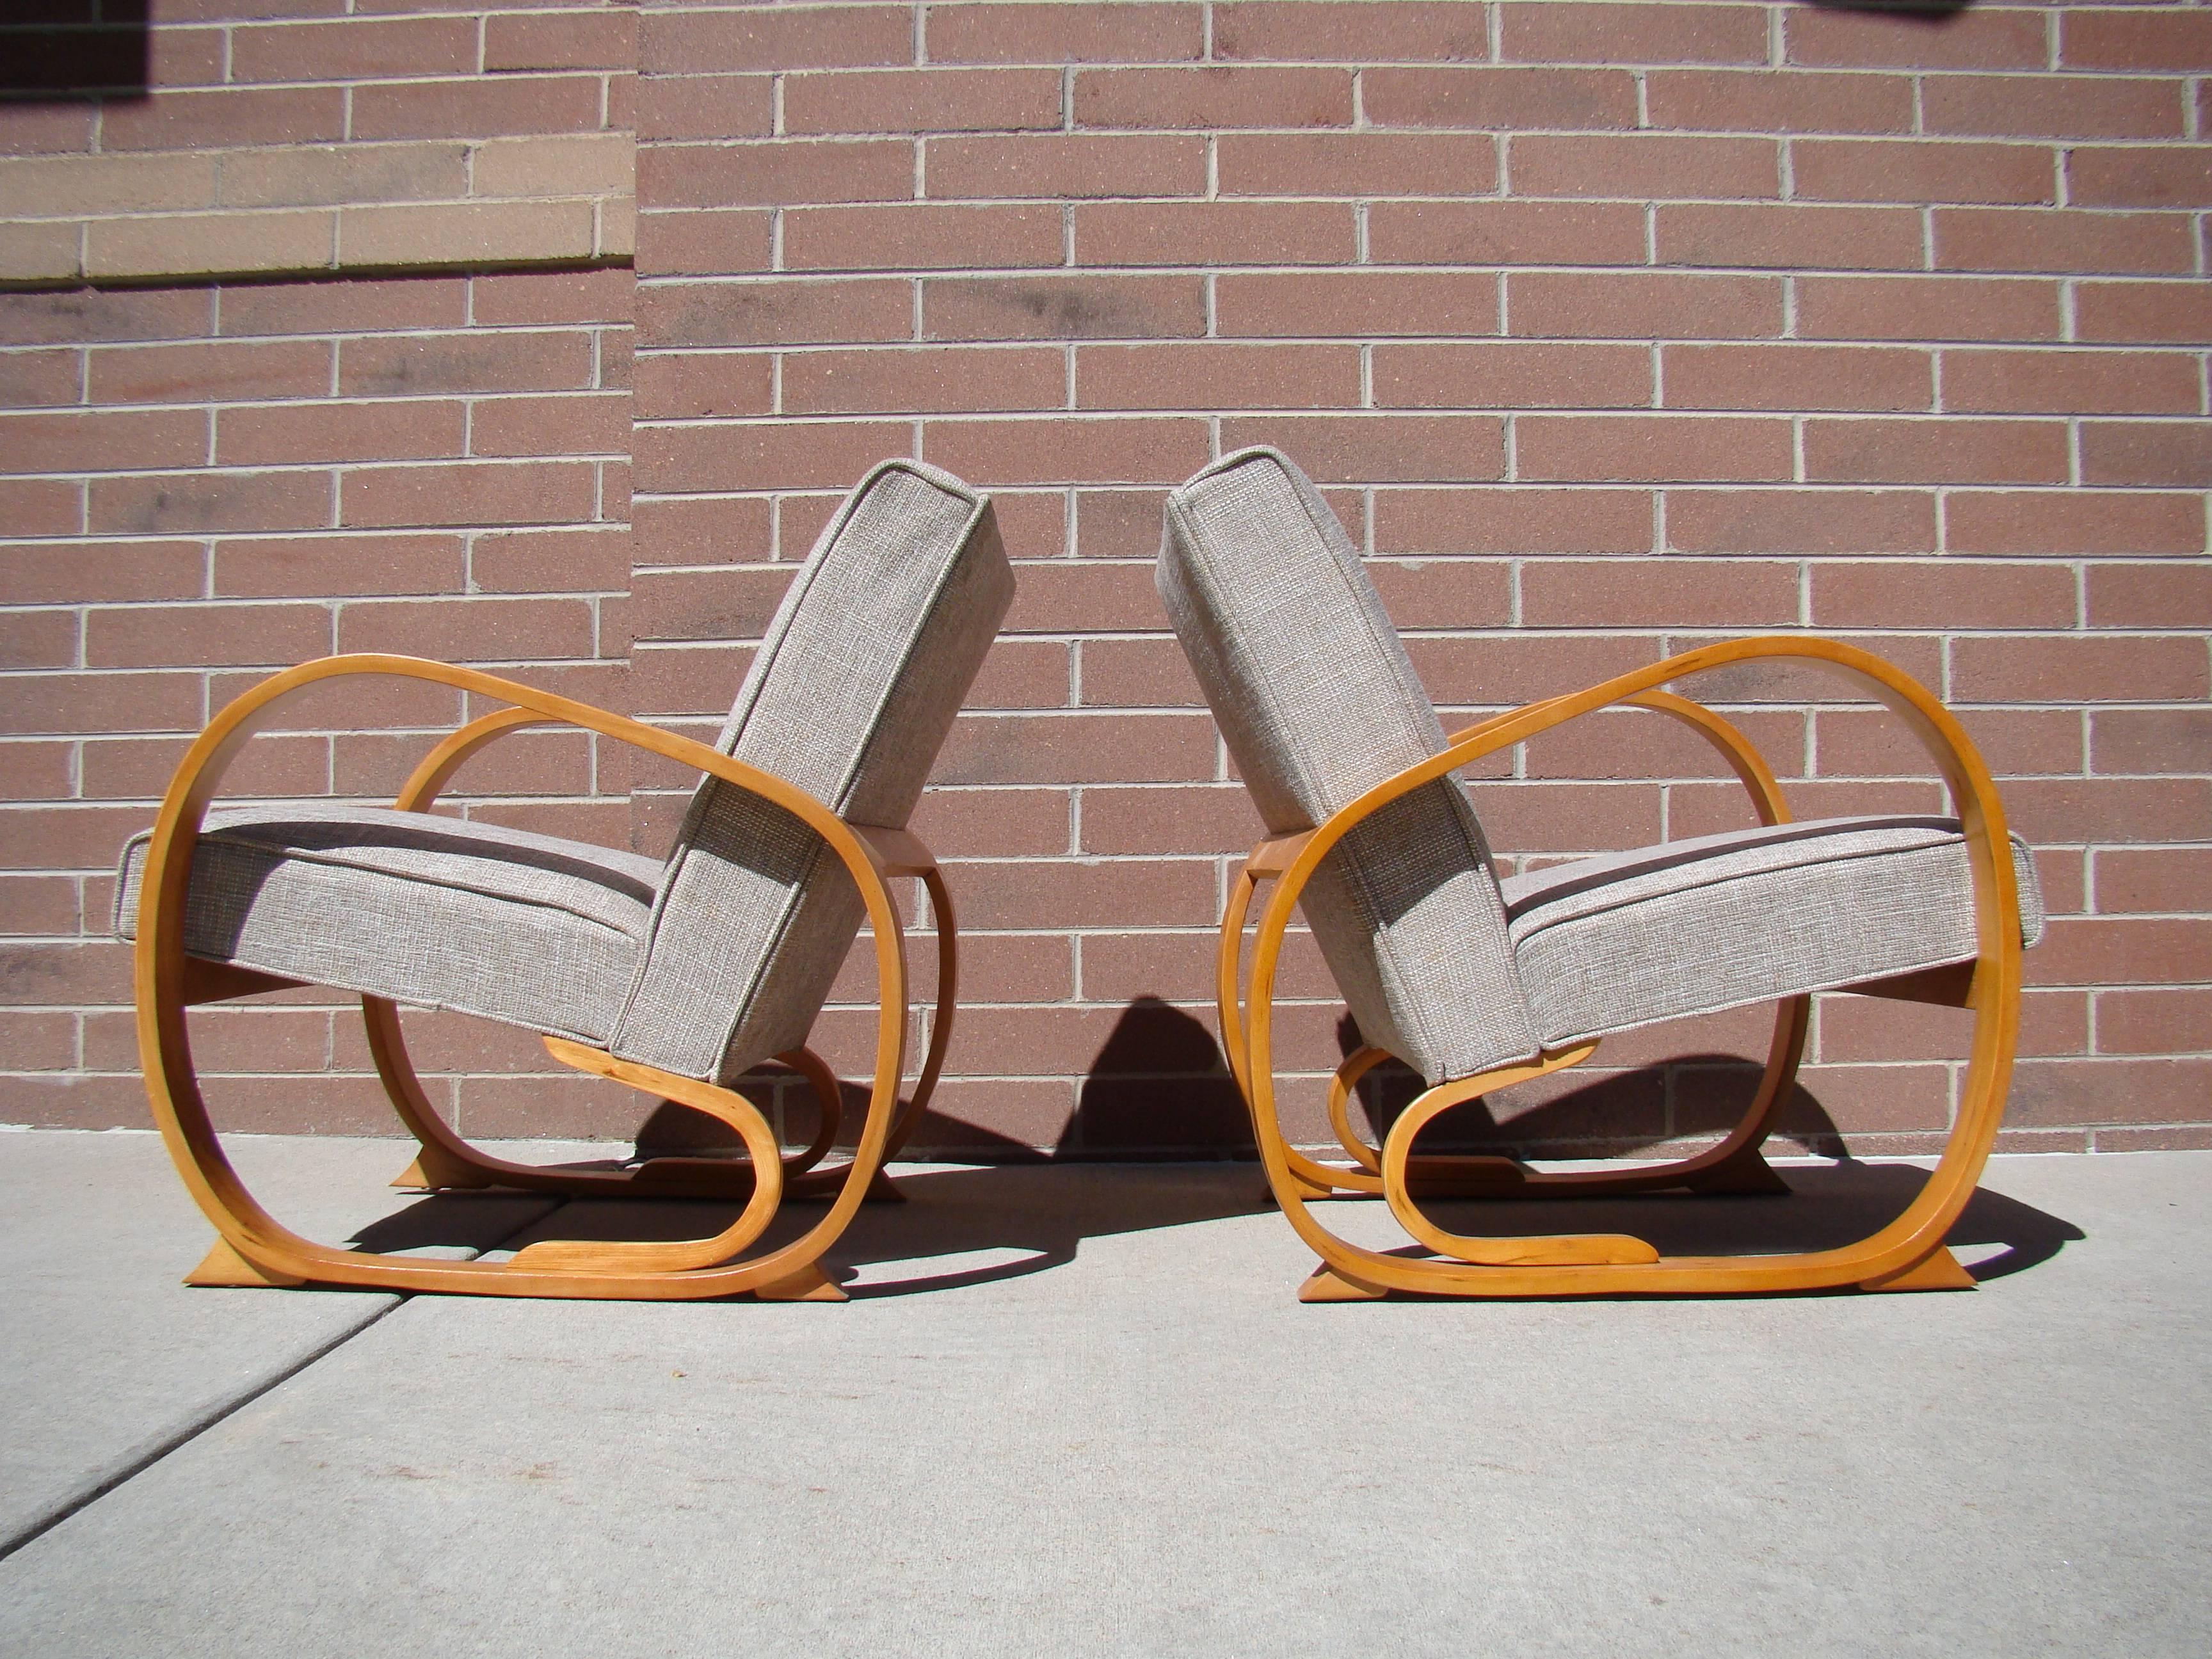 Beautiful matched pair of machine age Art Deco bentwood lounge chairs by Thonet, circa 1930s. Fully restored. Refinished and new upholstery. Image 10 shows a matching table in a separate listing.